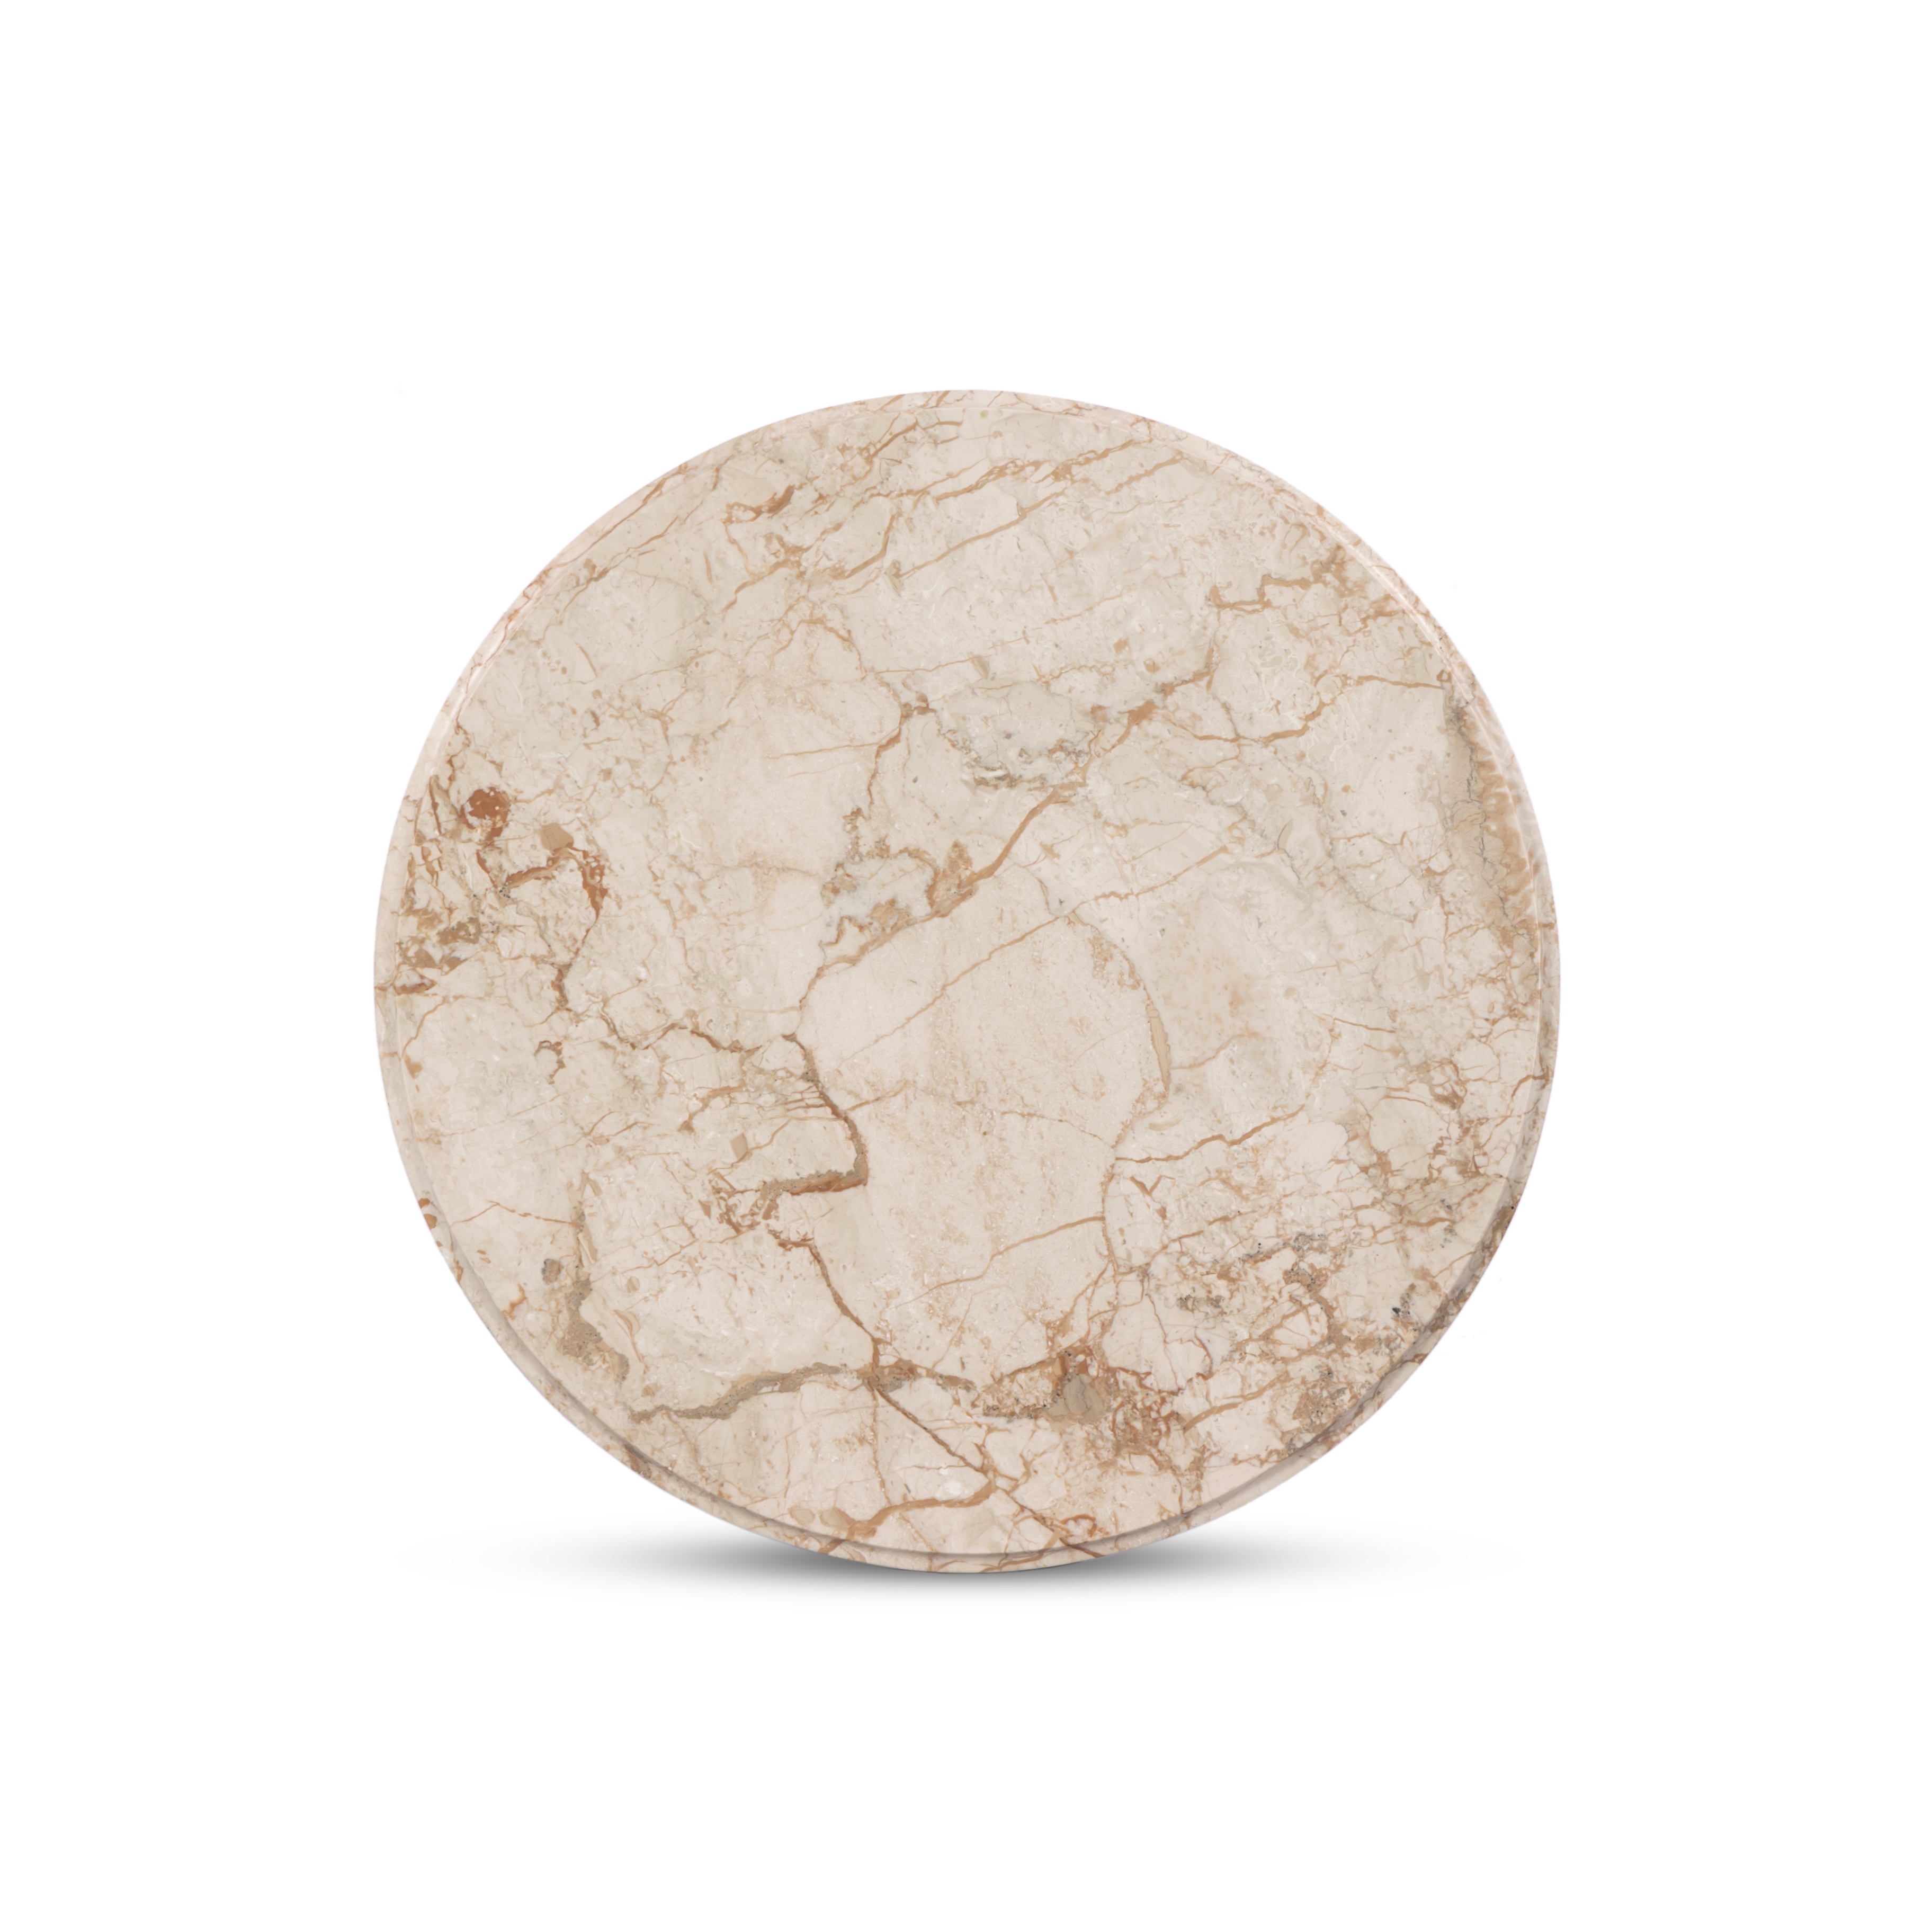 Eslo End Table-Desert Taupe Marble - Image 4